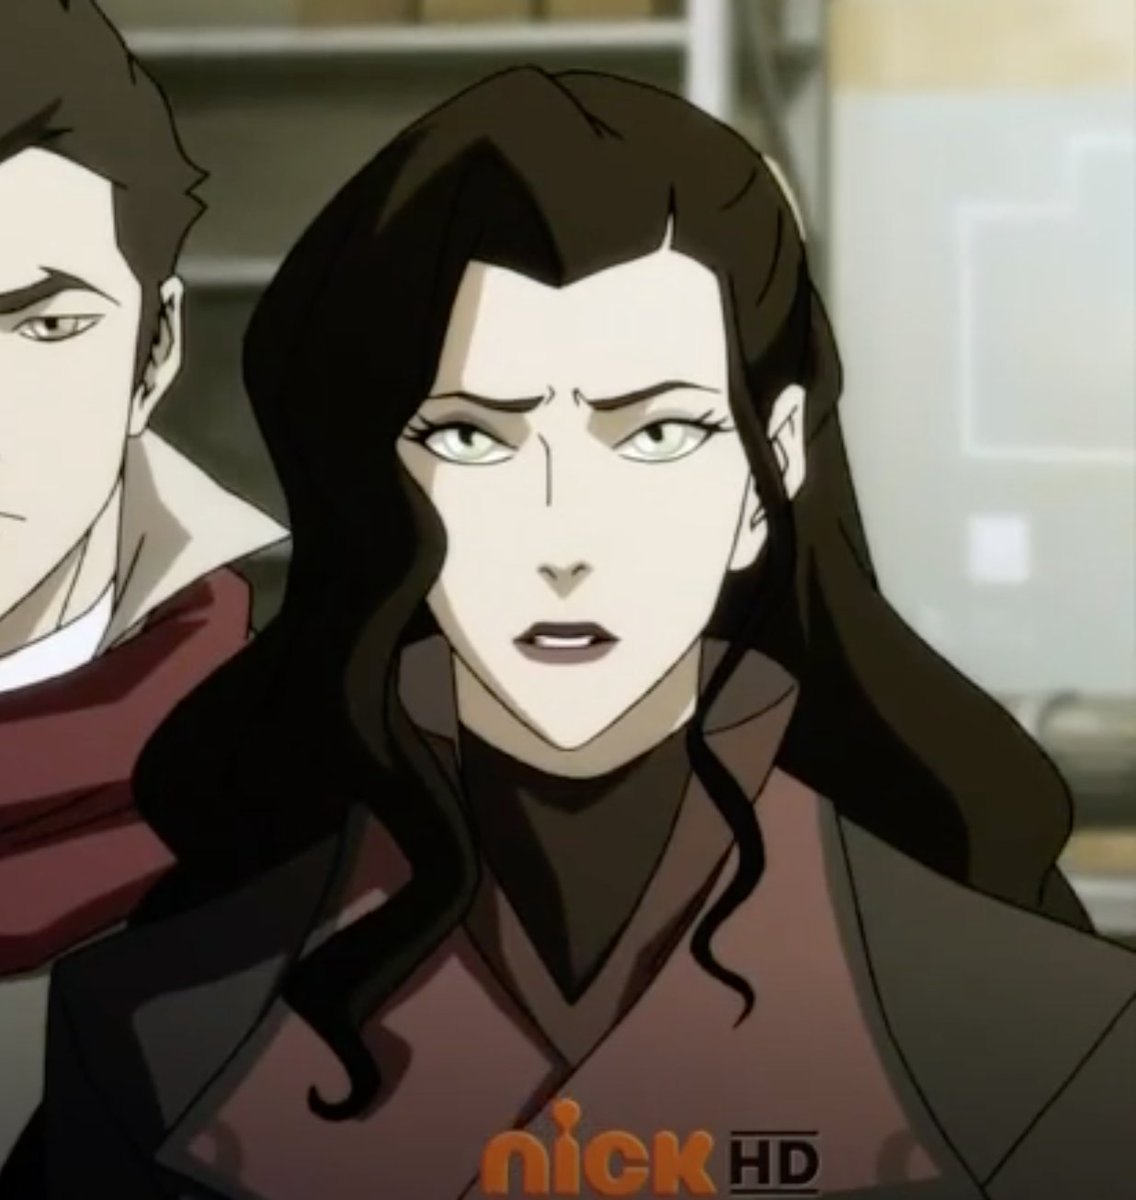 asami finally getting a personality we love to see it